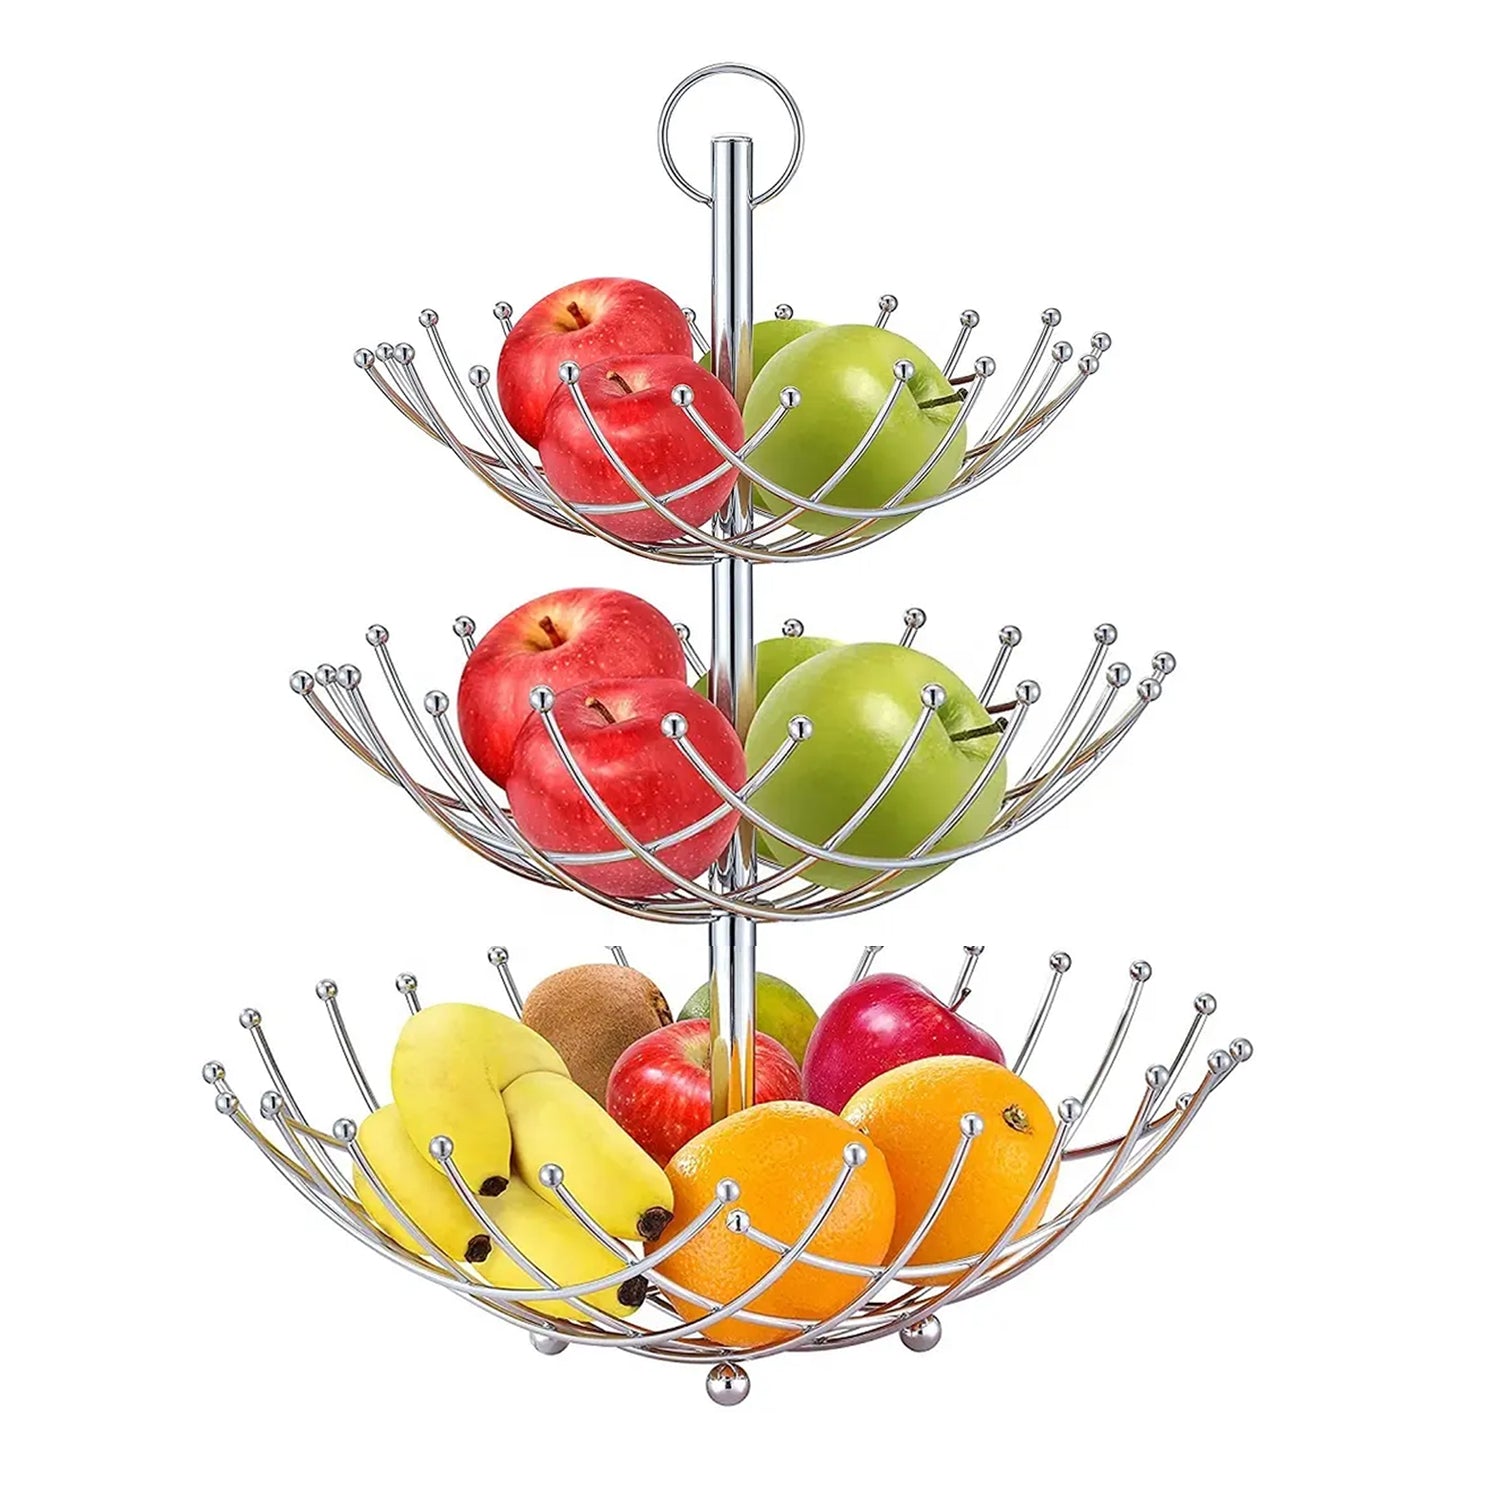 5183 3 Tier Fruit Basket Stainless Steel 60cm For Home Decoration & Kitchen Use Dukandaily